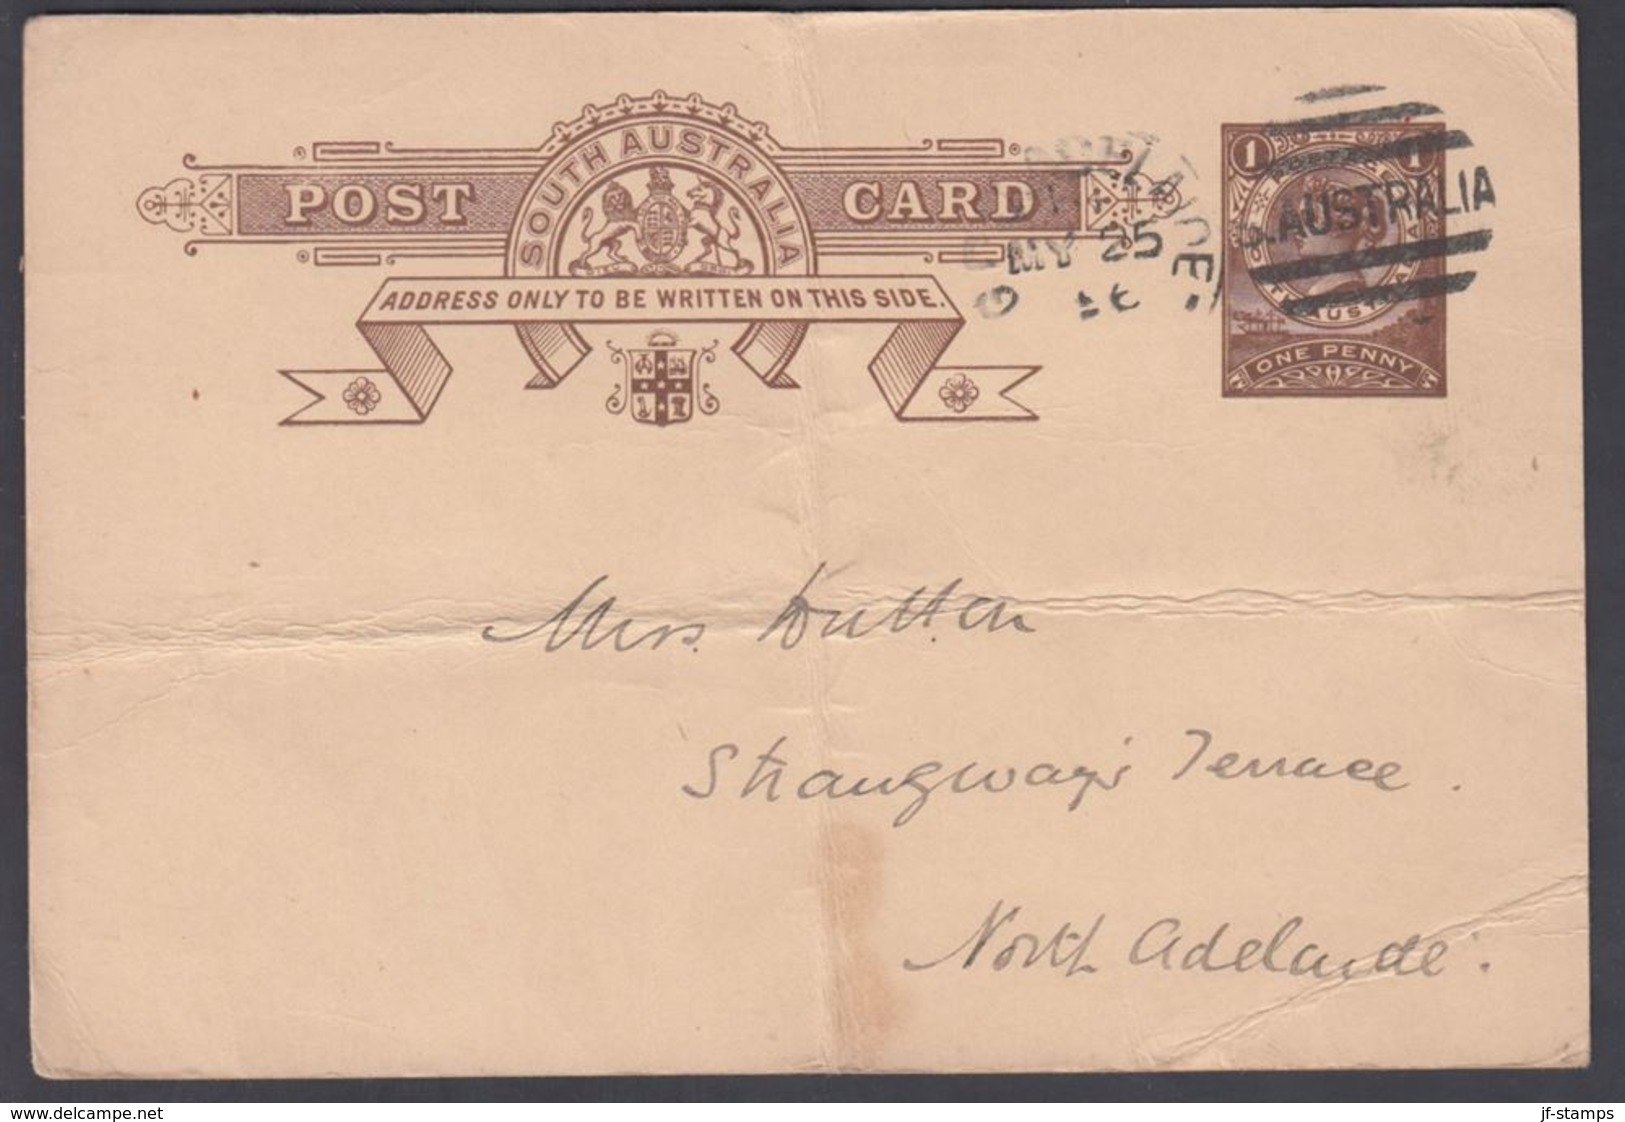 1896. QUEENSLAND AUSTRALIA  ONE PENNY POST CARD VICTORIA. MY 25 96.  () - JF321615 - Covers & Documents